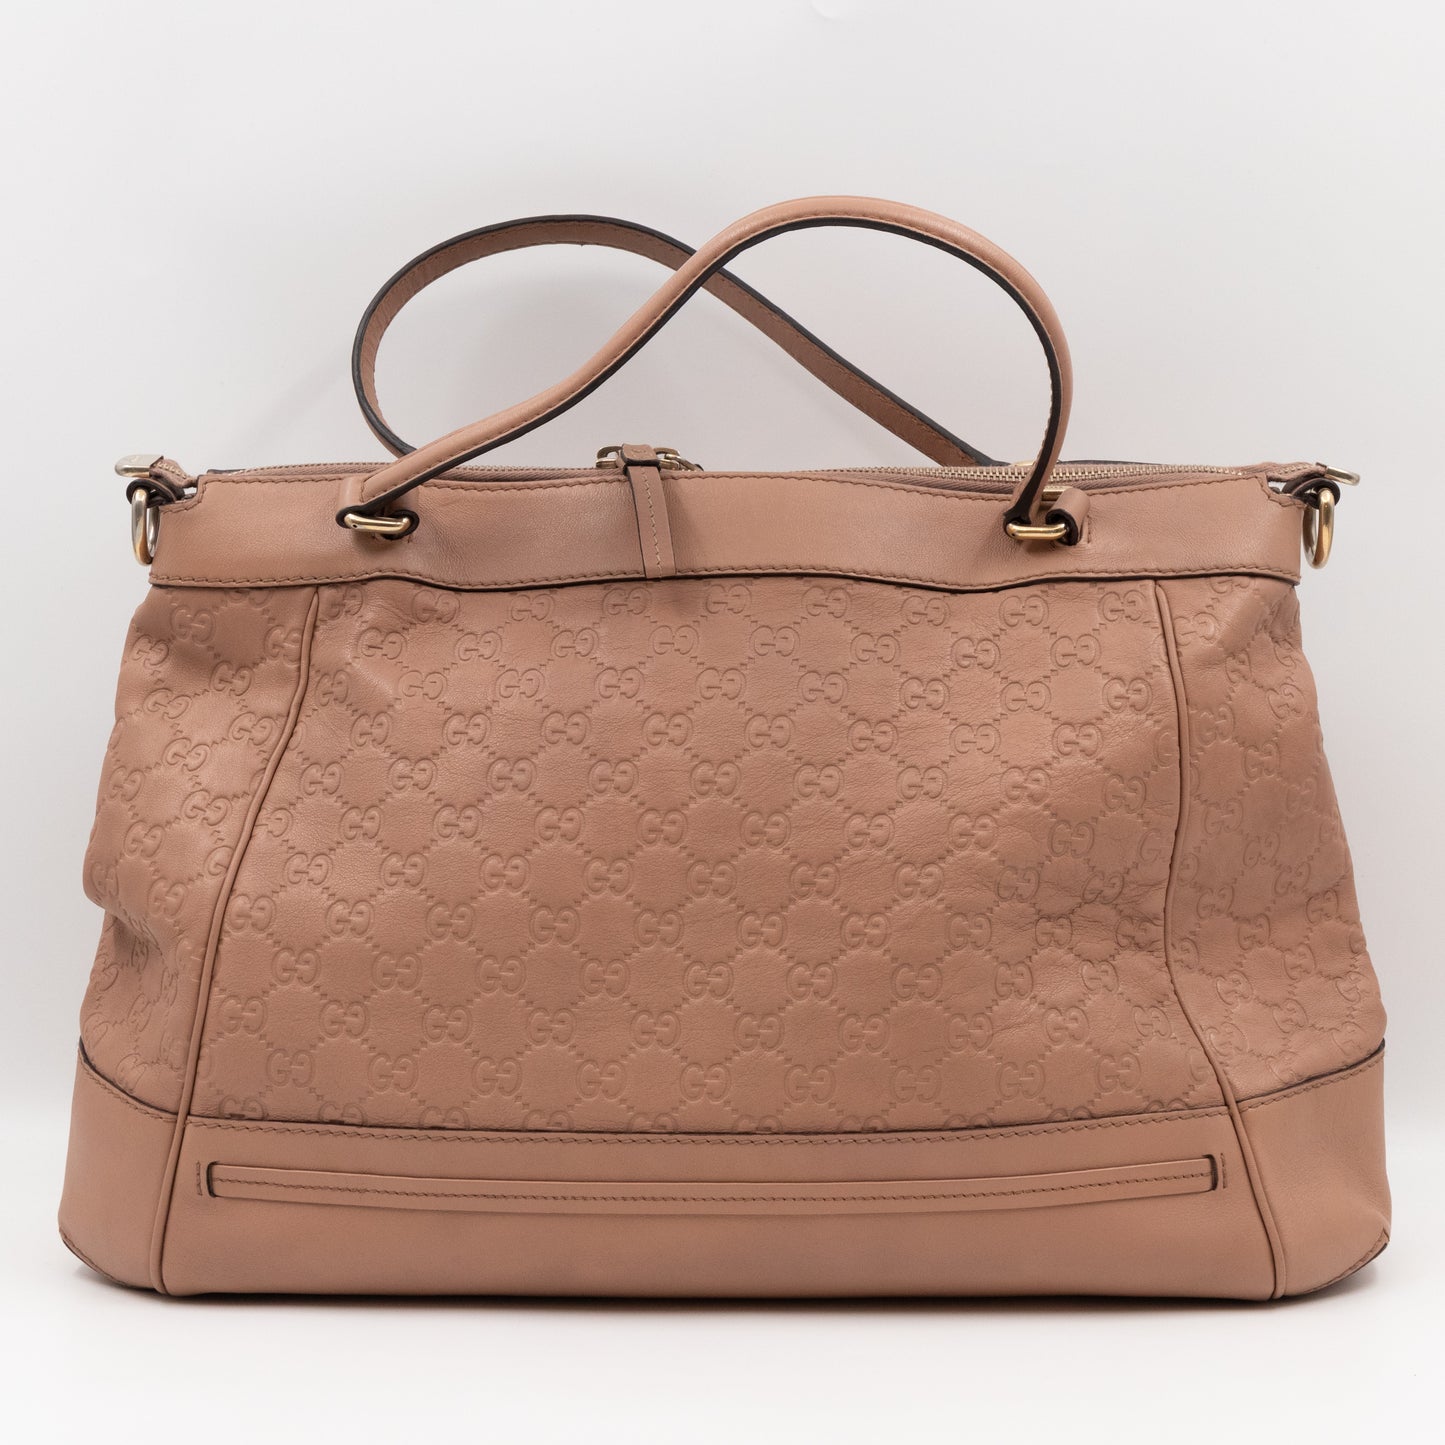 Mayfair Bow Tote Bag Beige Rose Guccissima Leather